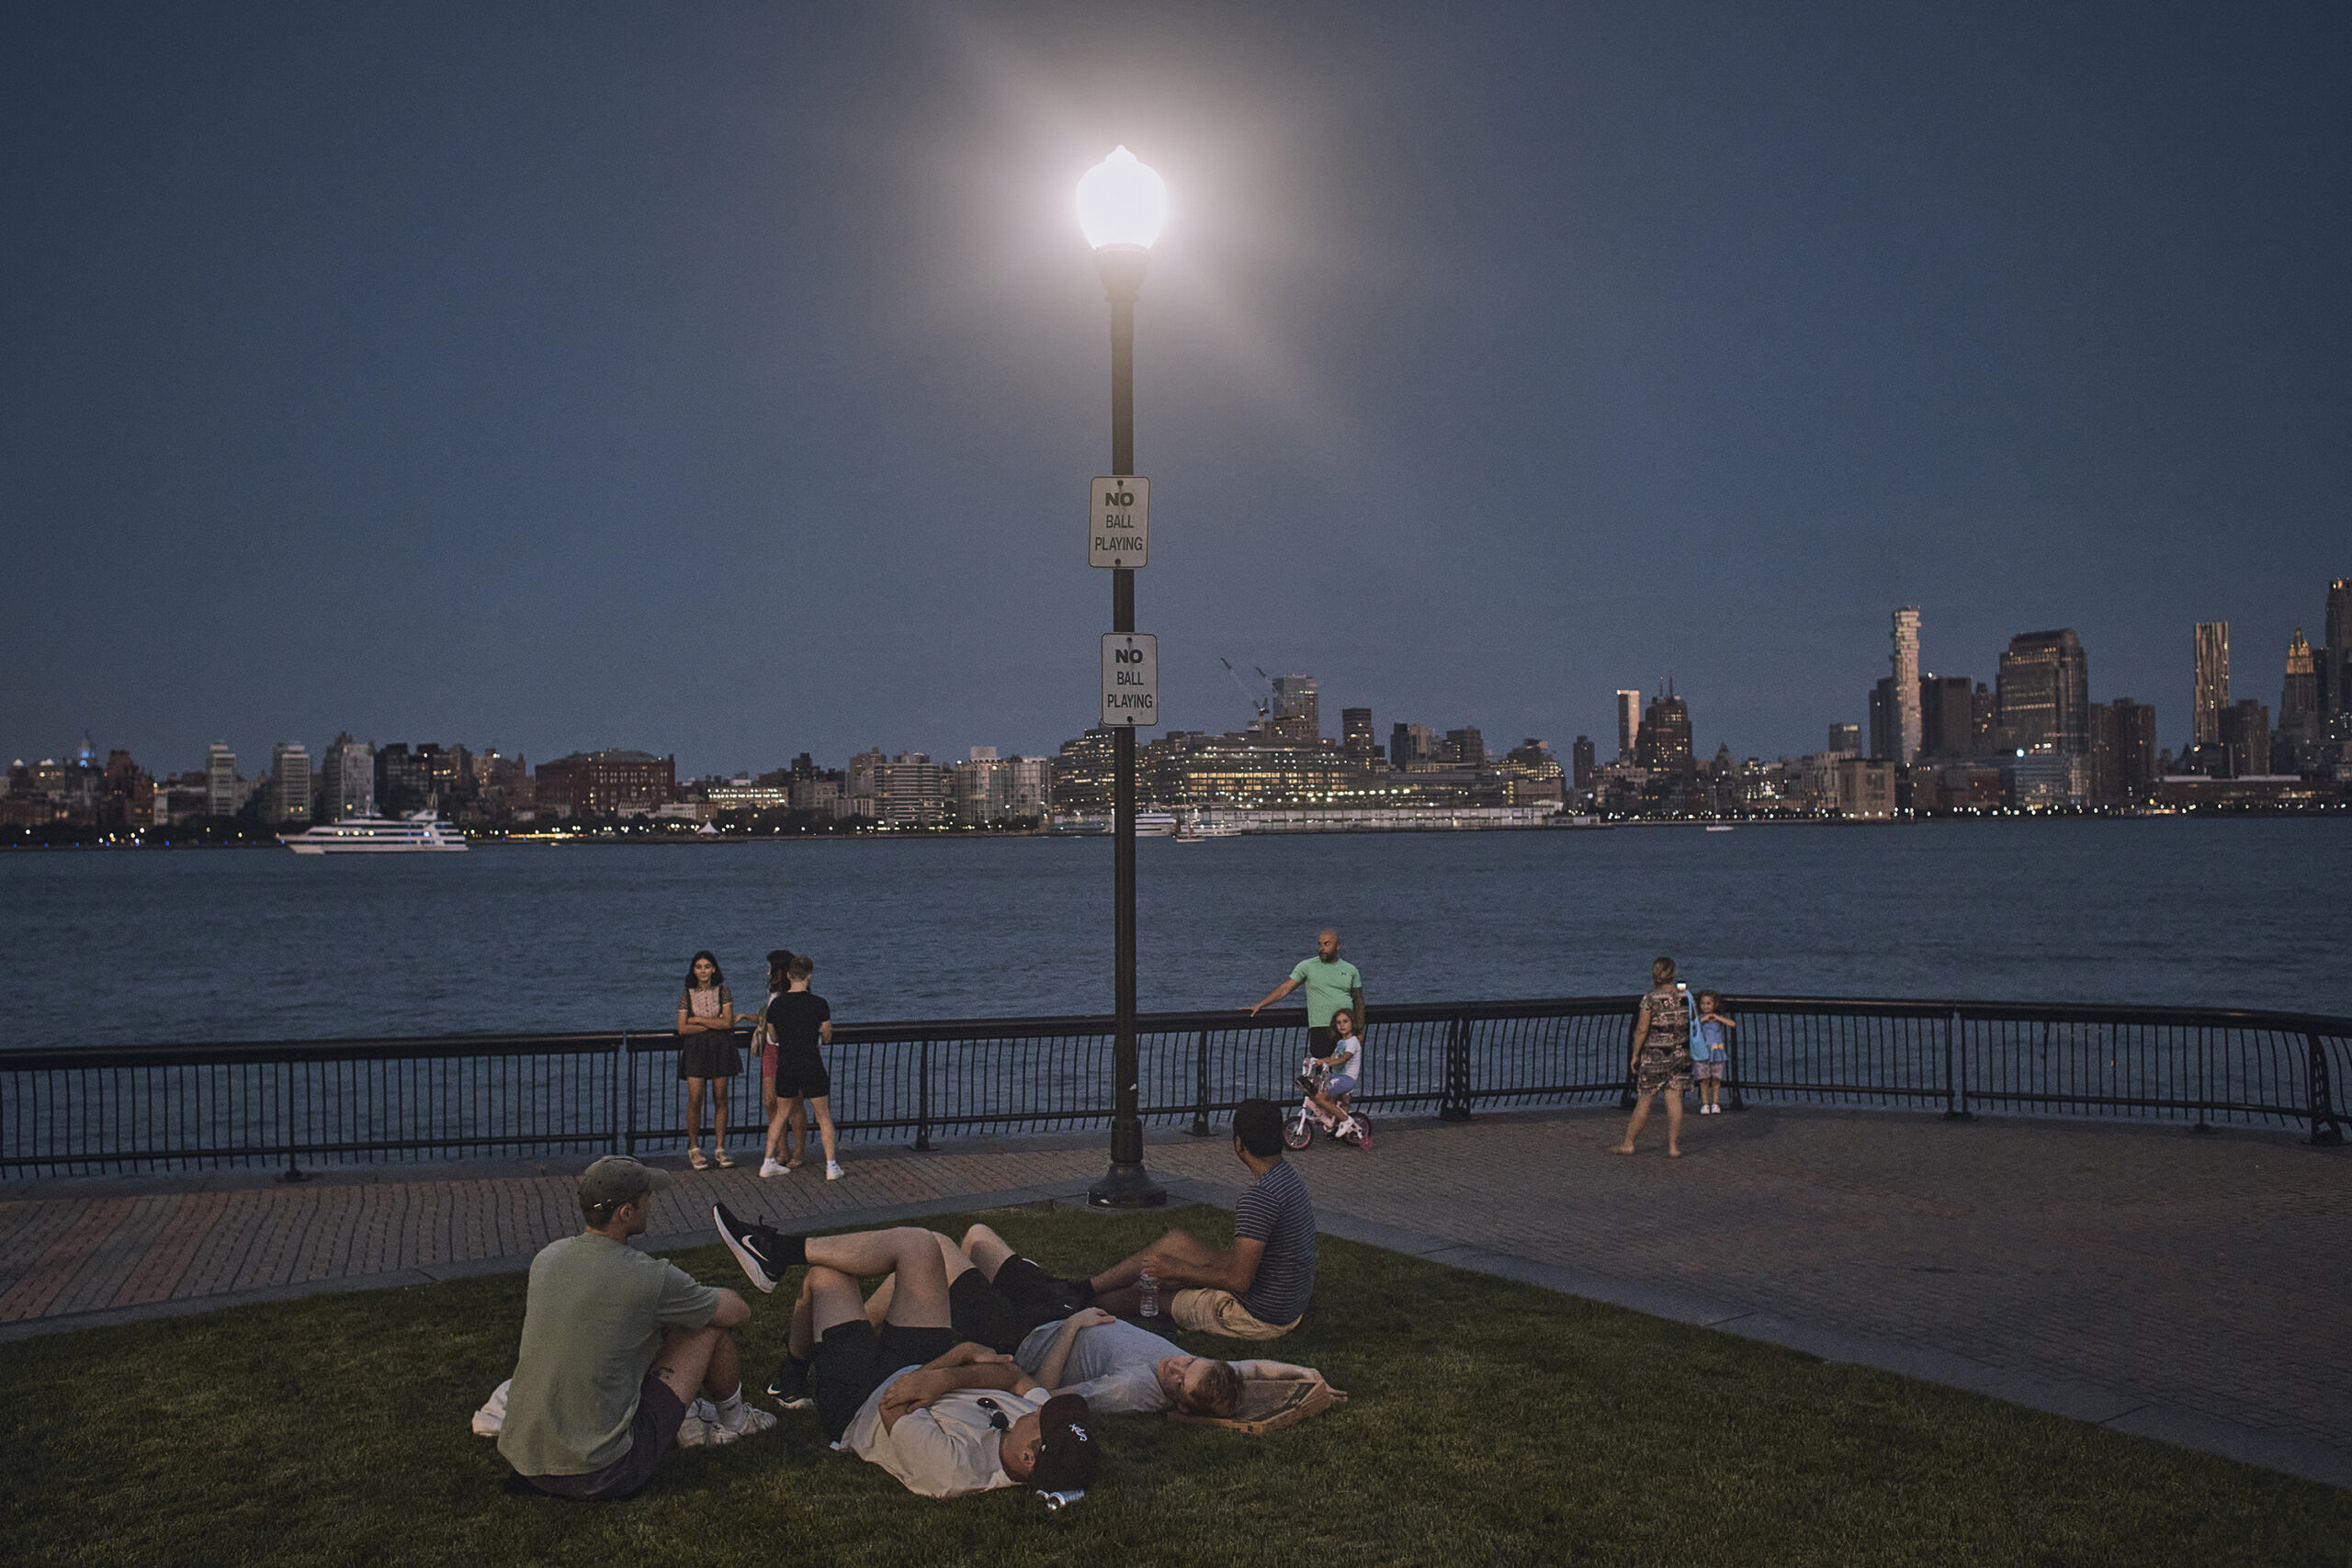 FILE - People spend time at the park at dusk during a summer heat wave, July 21, 2022, in Hoboken, N.J. The continental United States in July set a record for overnight warmth, providing little relief from the day’s sizzling heat for people, animals, plants and the electric grid, meteorologists said. (AP Photo/Andres Kudacki, File)